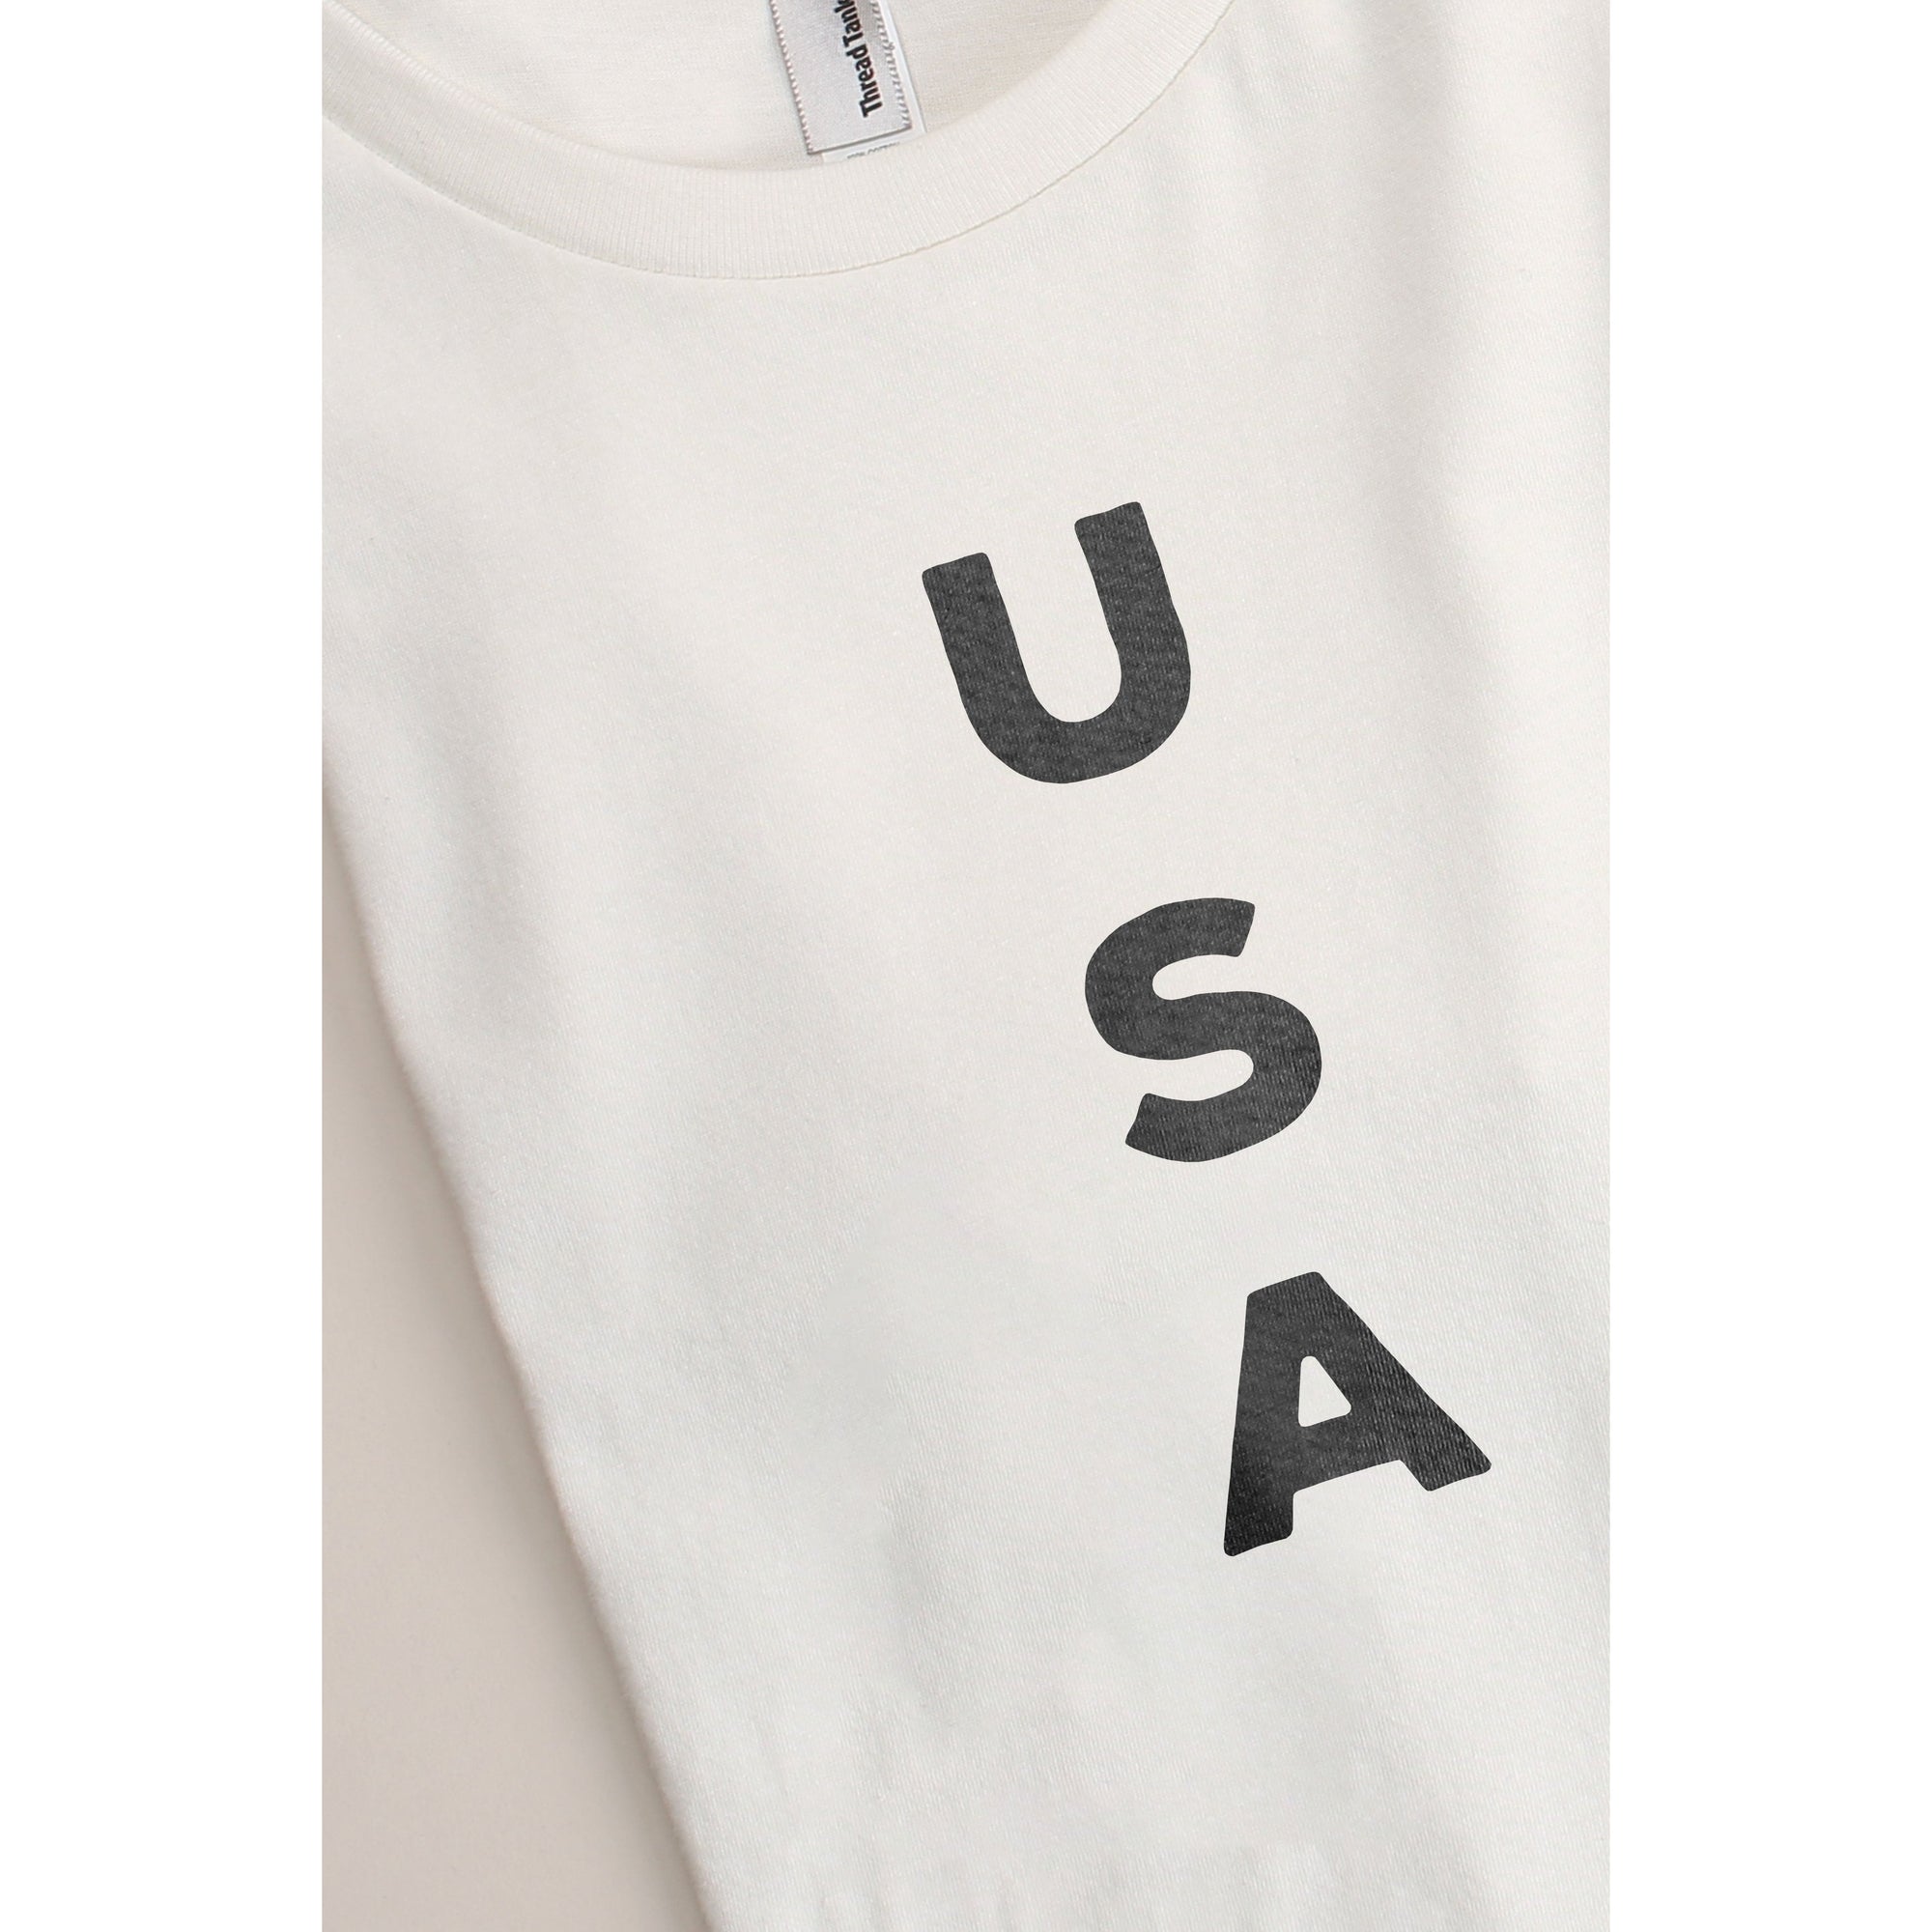 United States of America USA - thread tank | Stories you can wear.